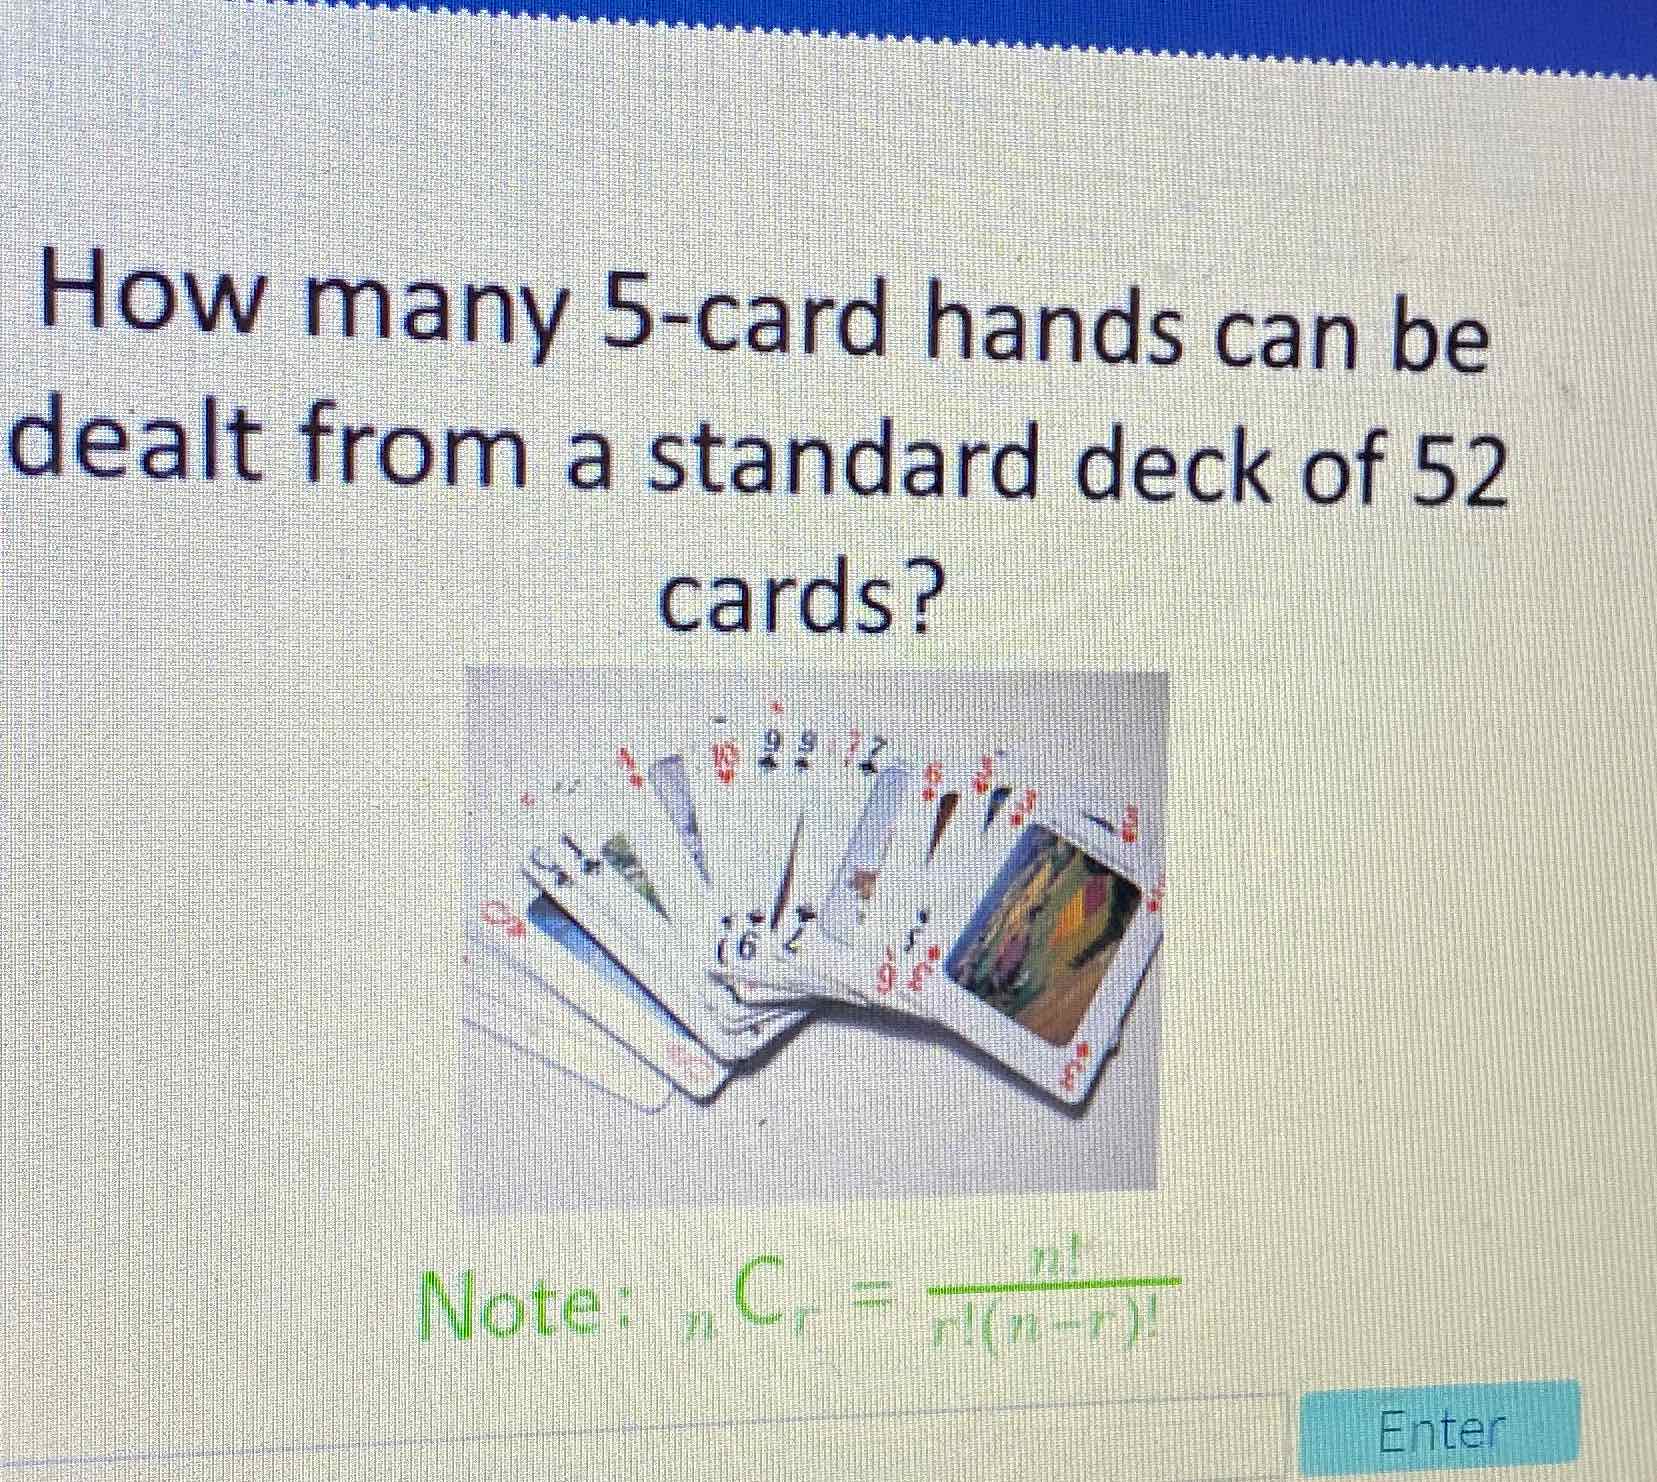 How many 5-card hands can be dealt from a standard deck of 52 cards?